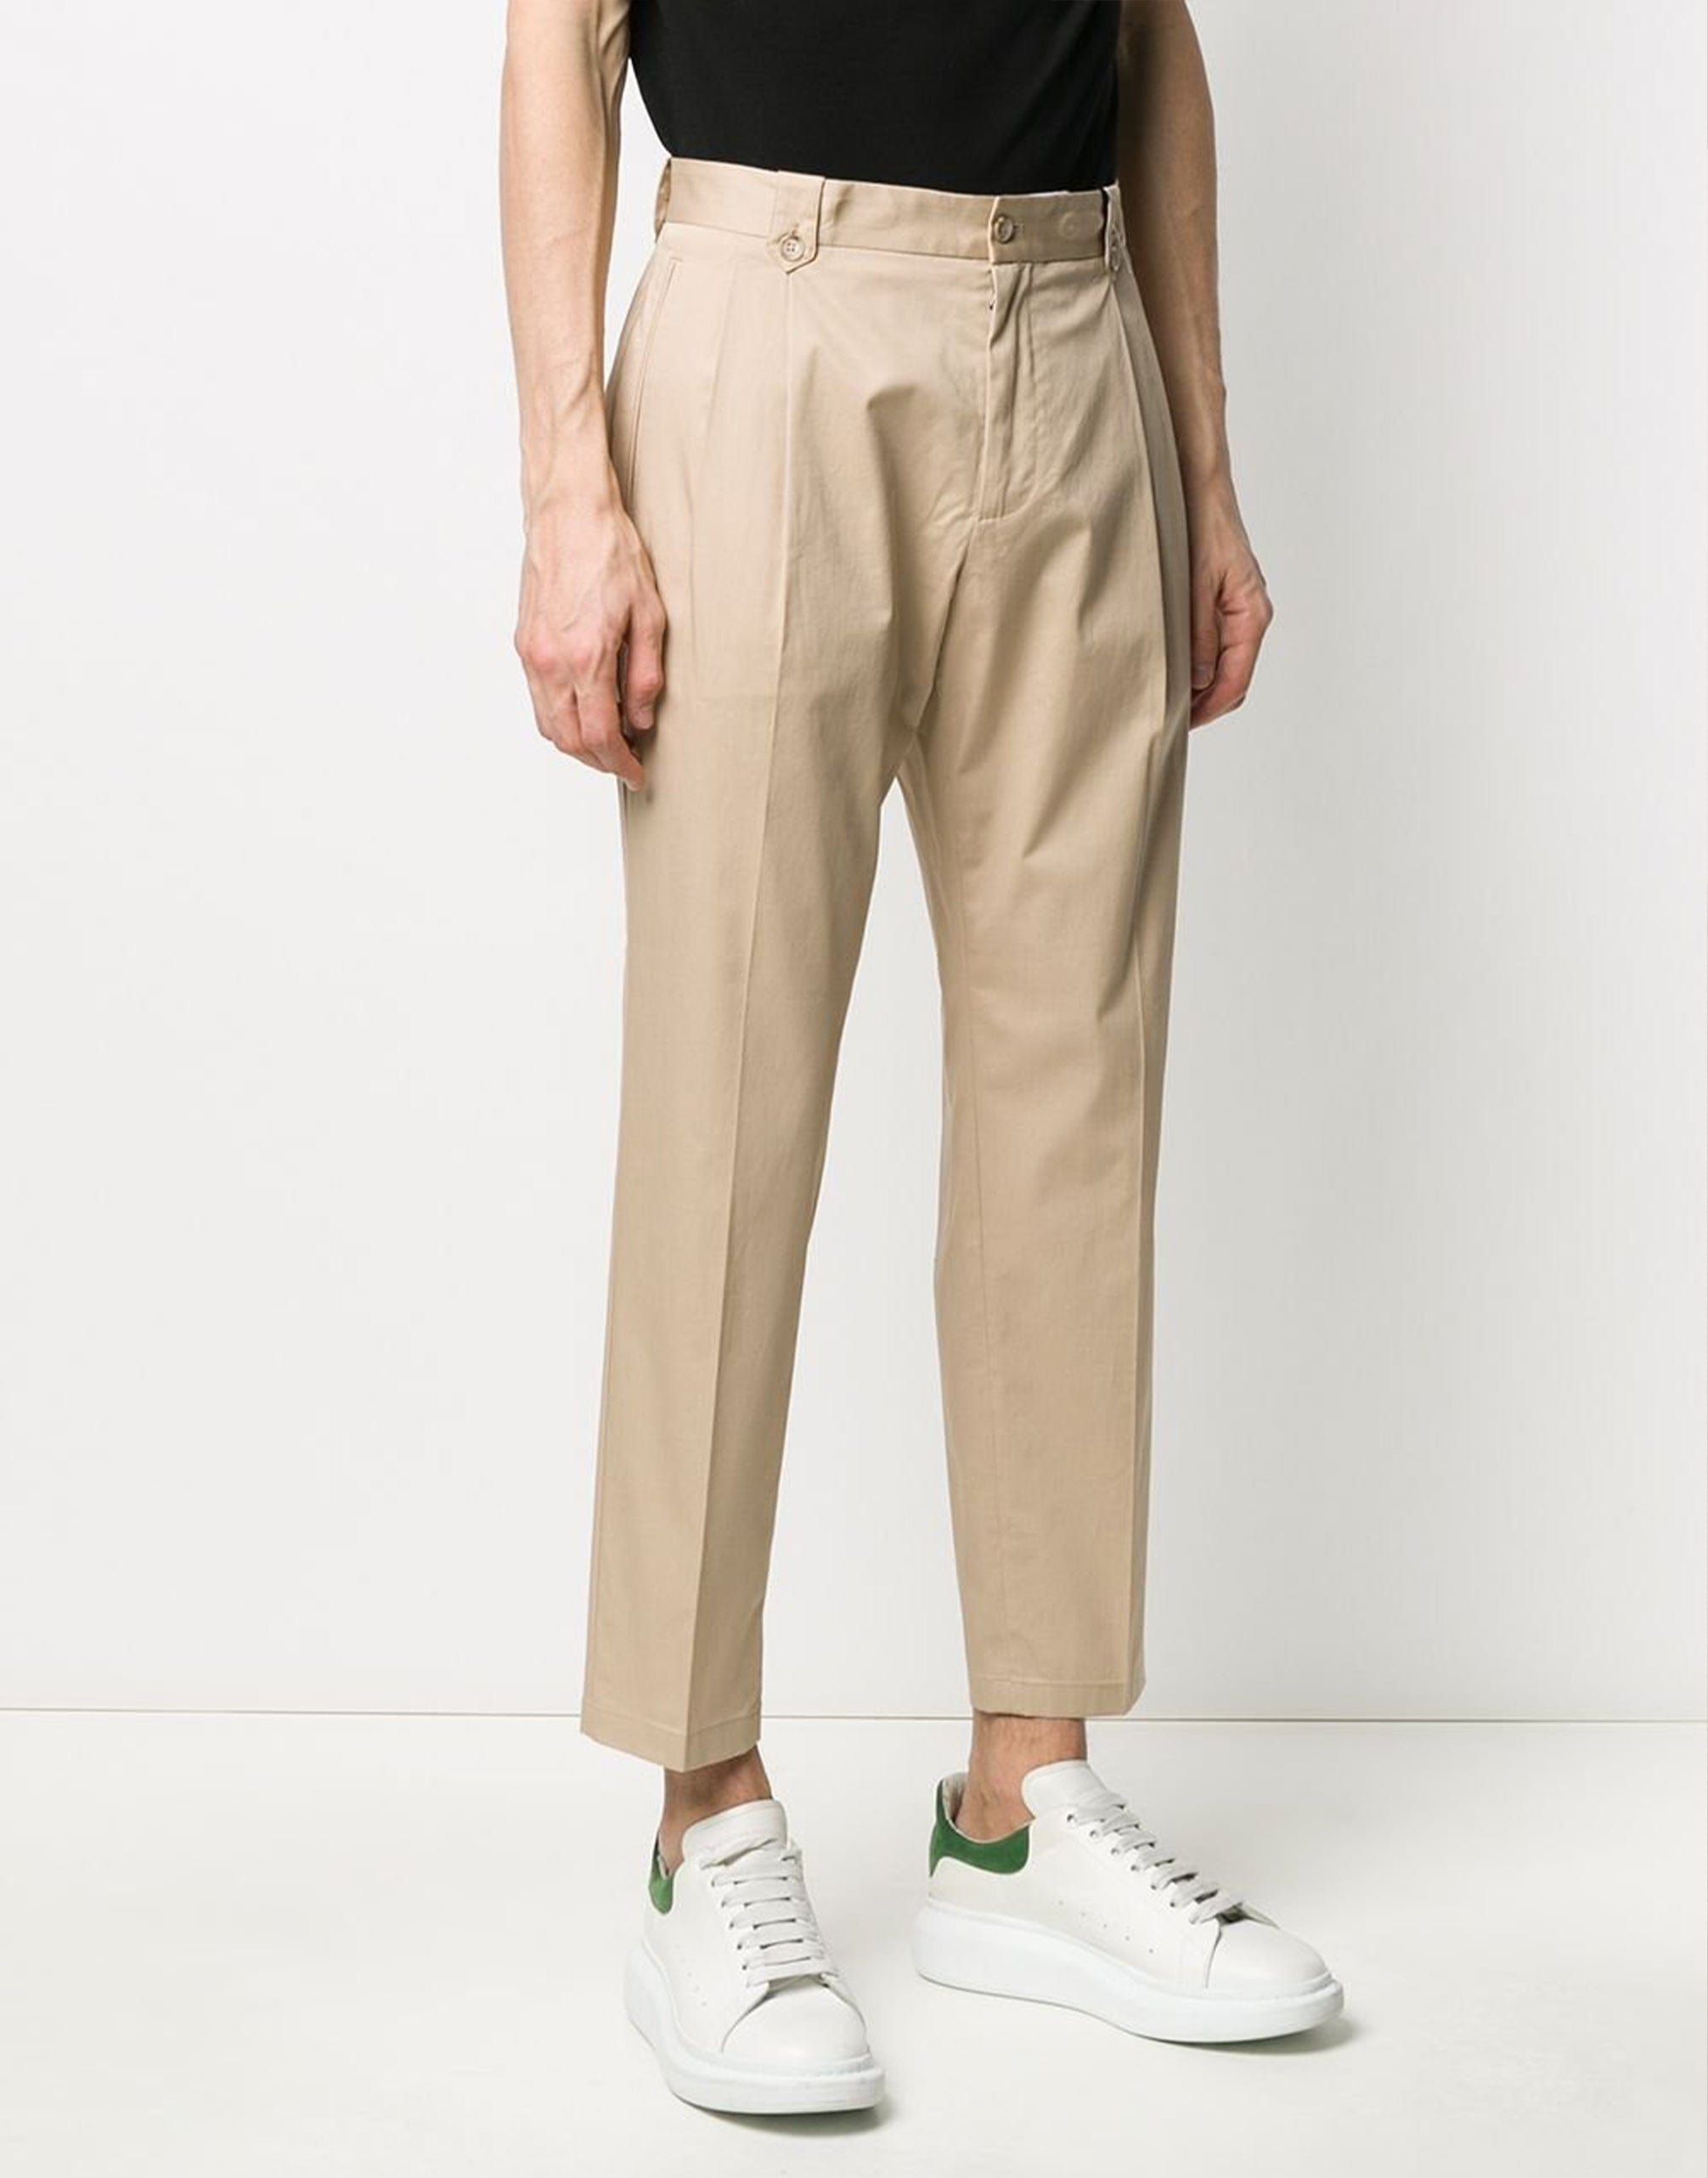 Dolce & Gabbana Pleated Cropped Pants